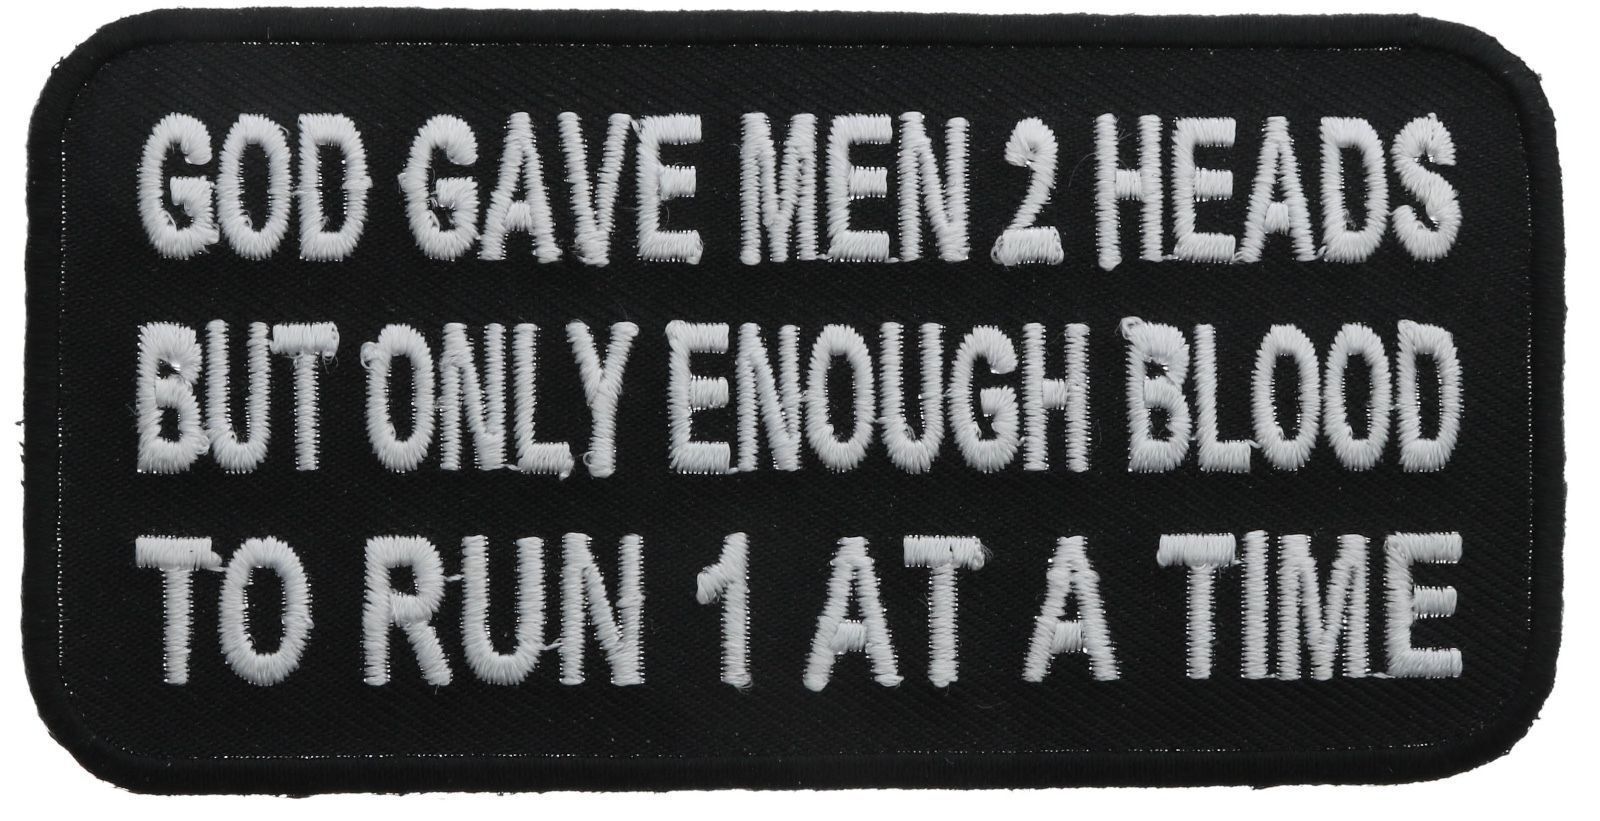 God Gave Men 2 Heads But Only Enough Blood To Run 1 At A Time Biker Patch F1D1L